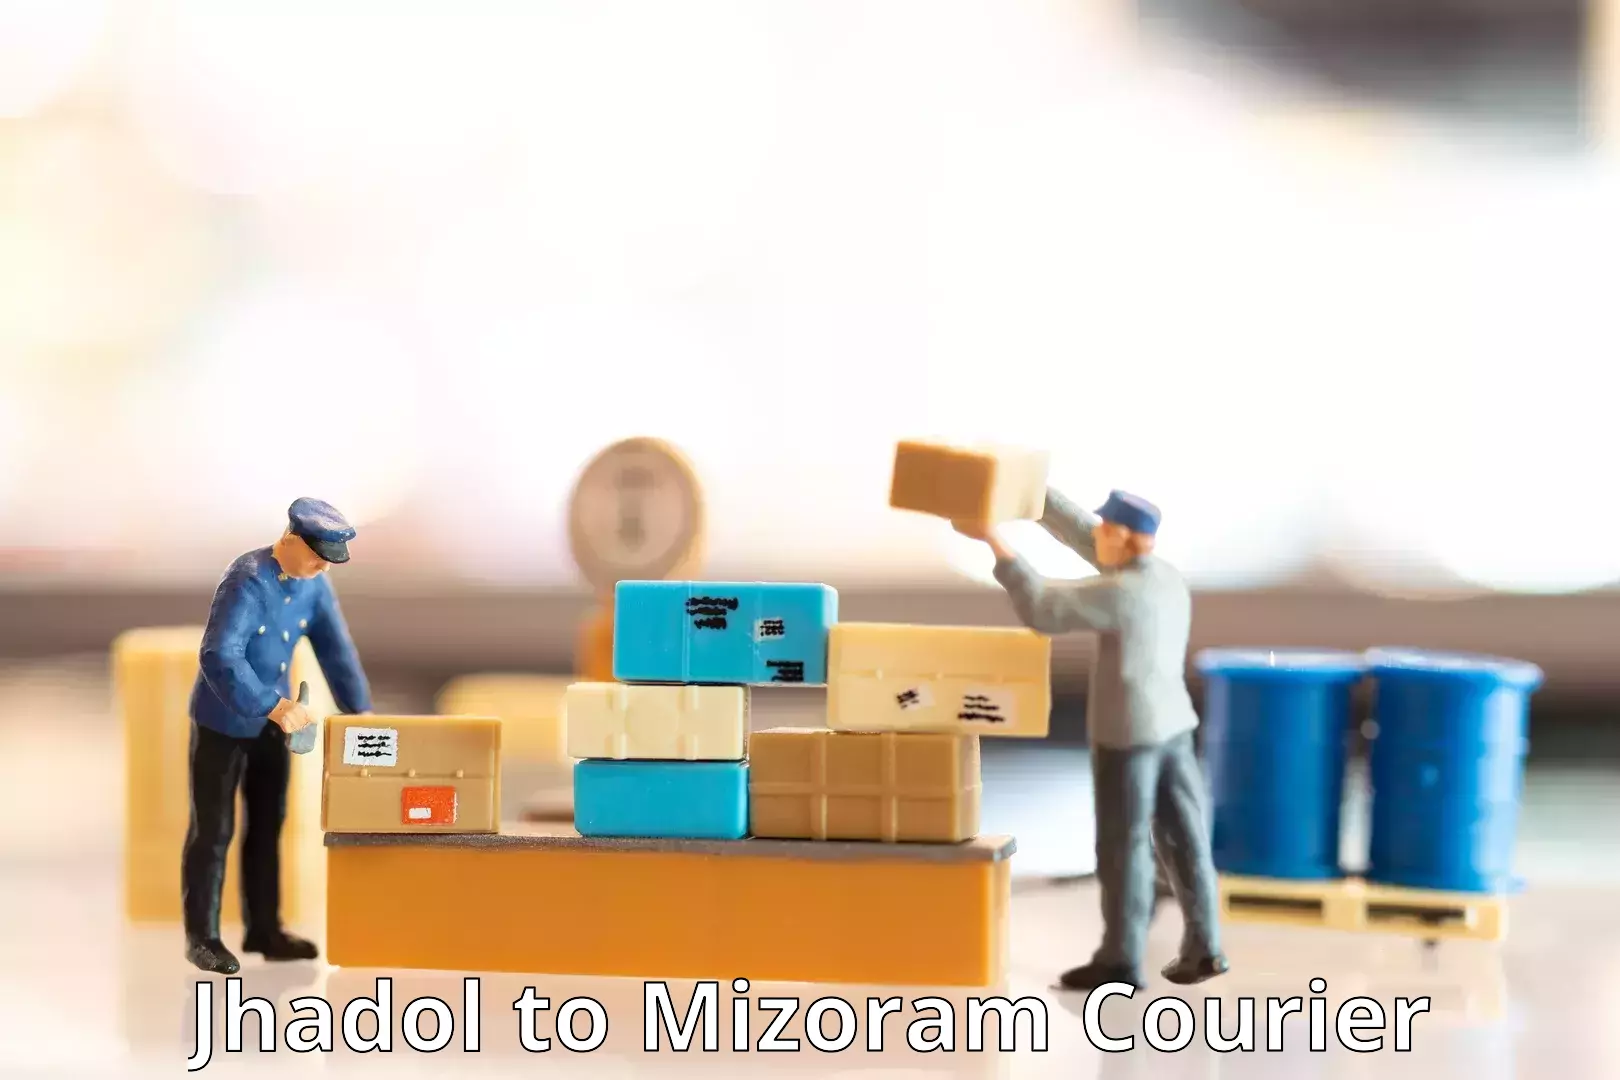 Overnight delivery services Jhadol to Mizoram